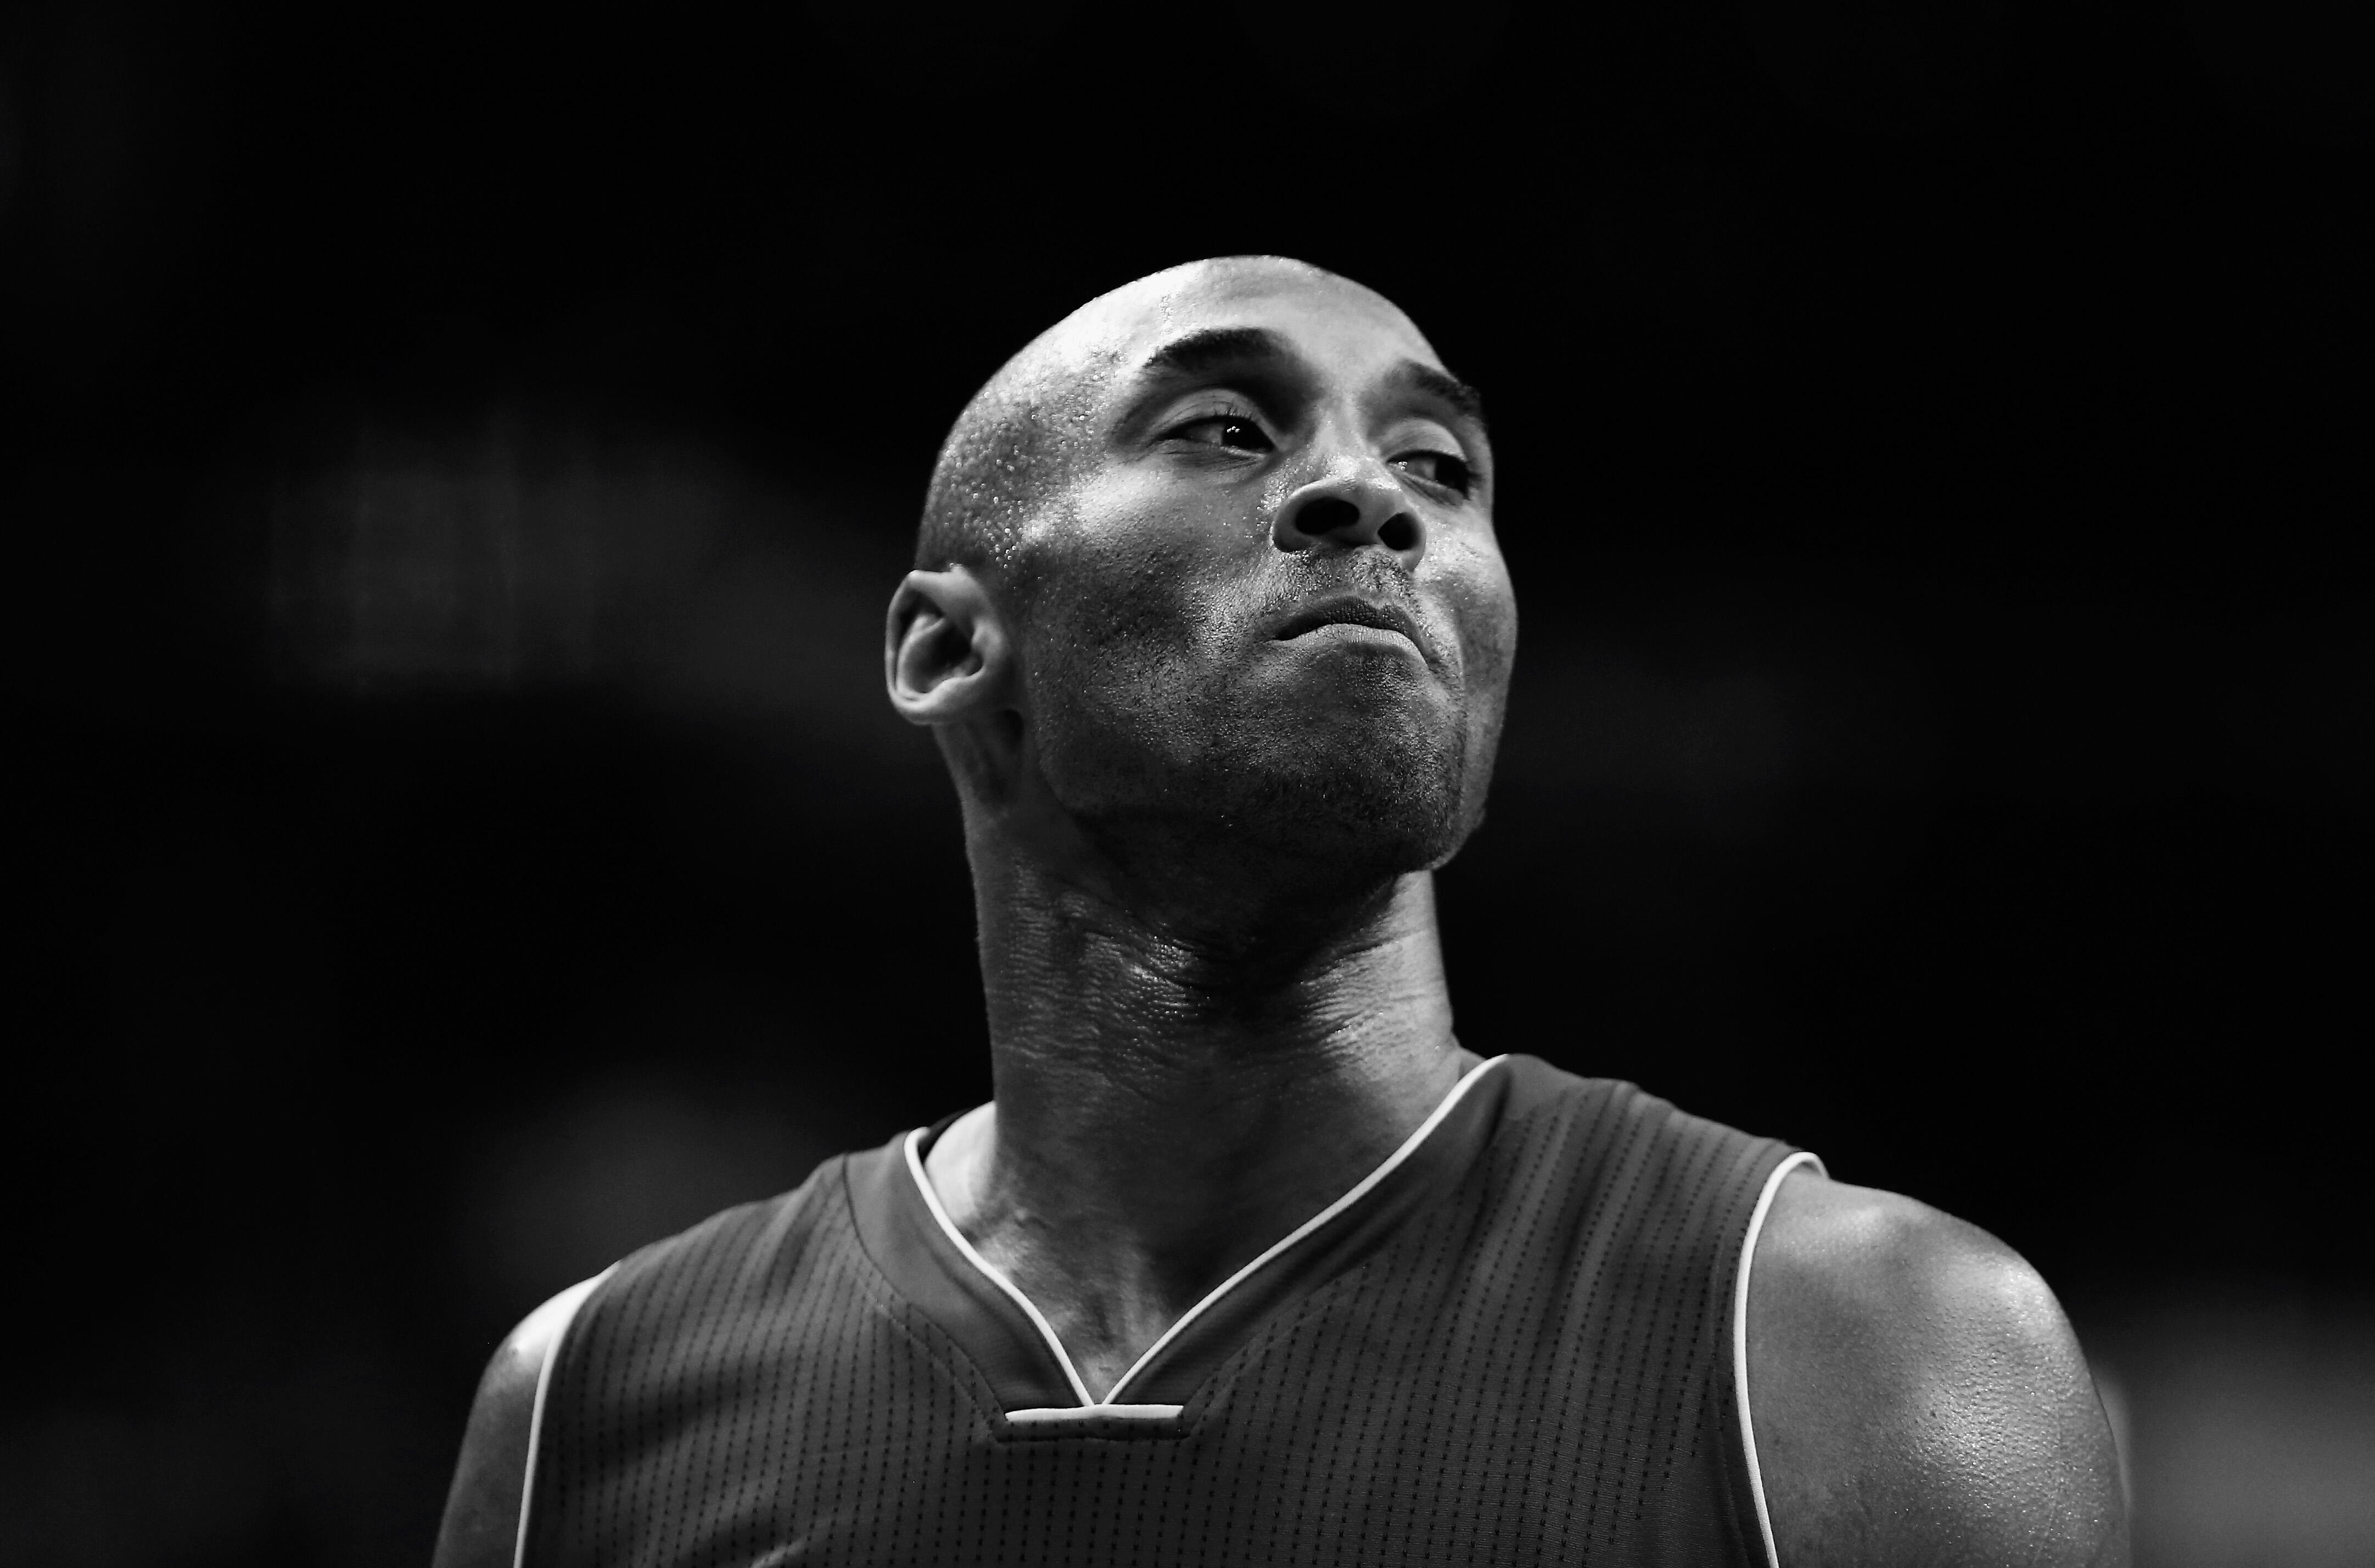 Remembering Kobe Bryant on one-year anniversary of his death